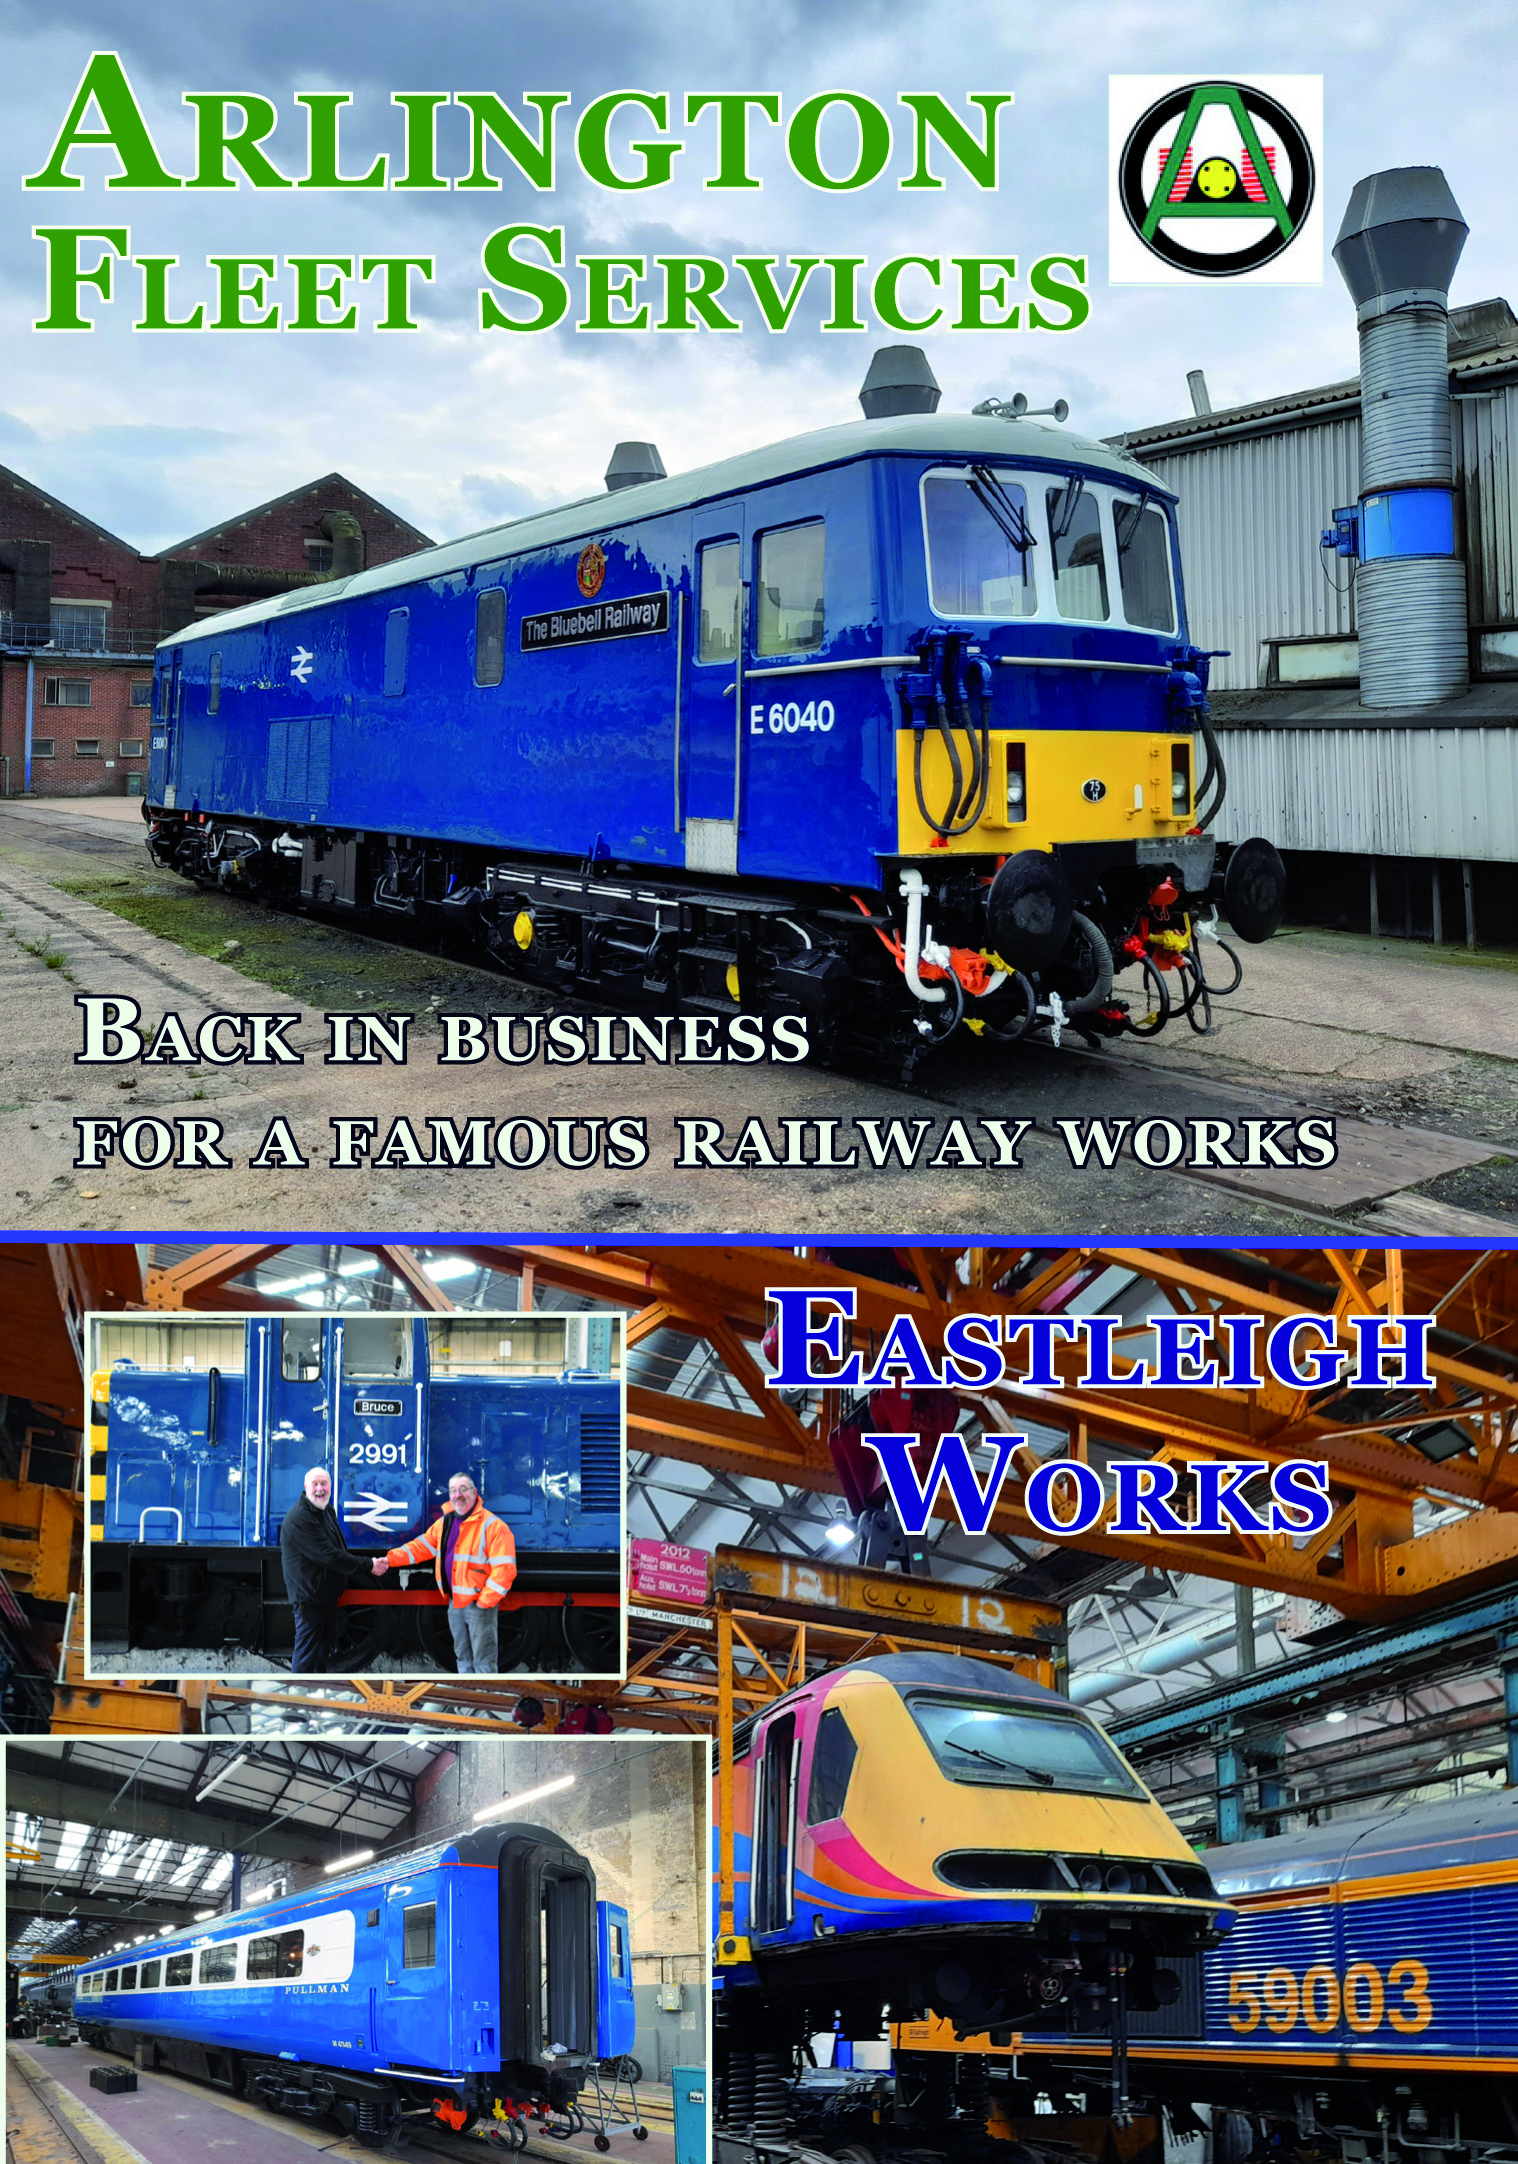 The Story of Arlington Fleet Services at Eastleigh Works